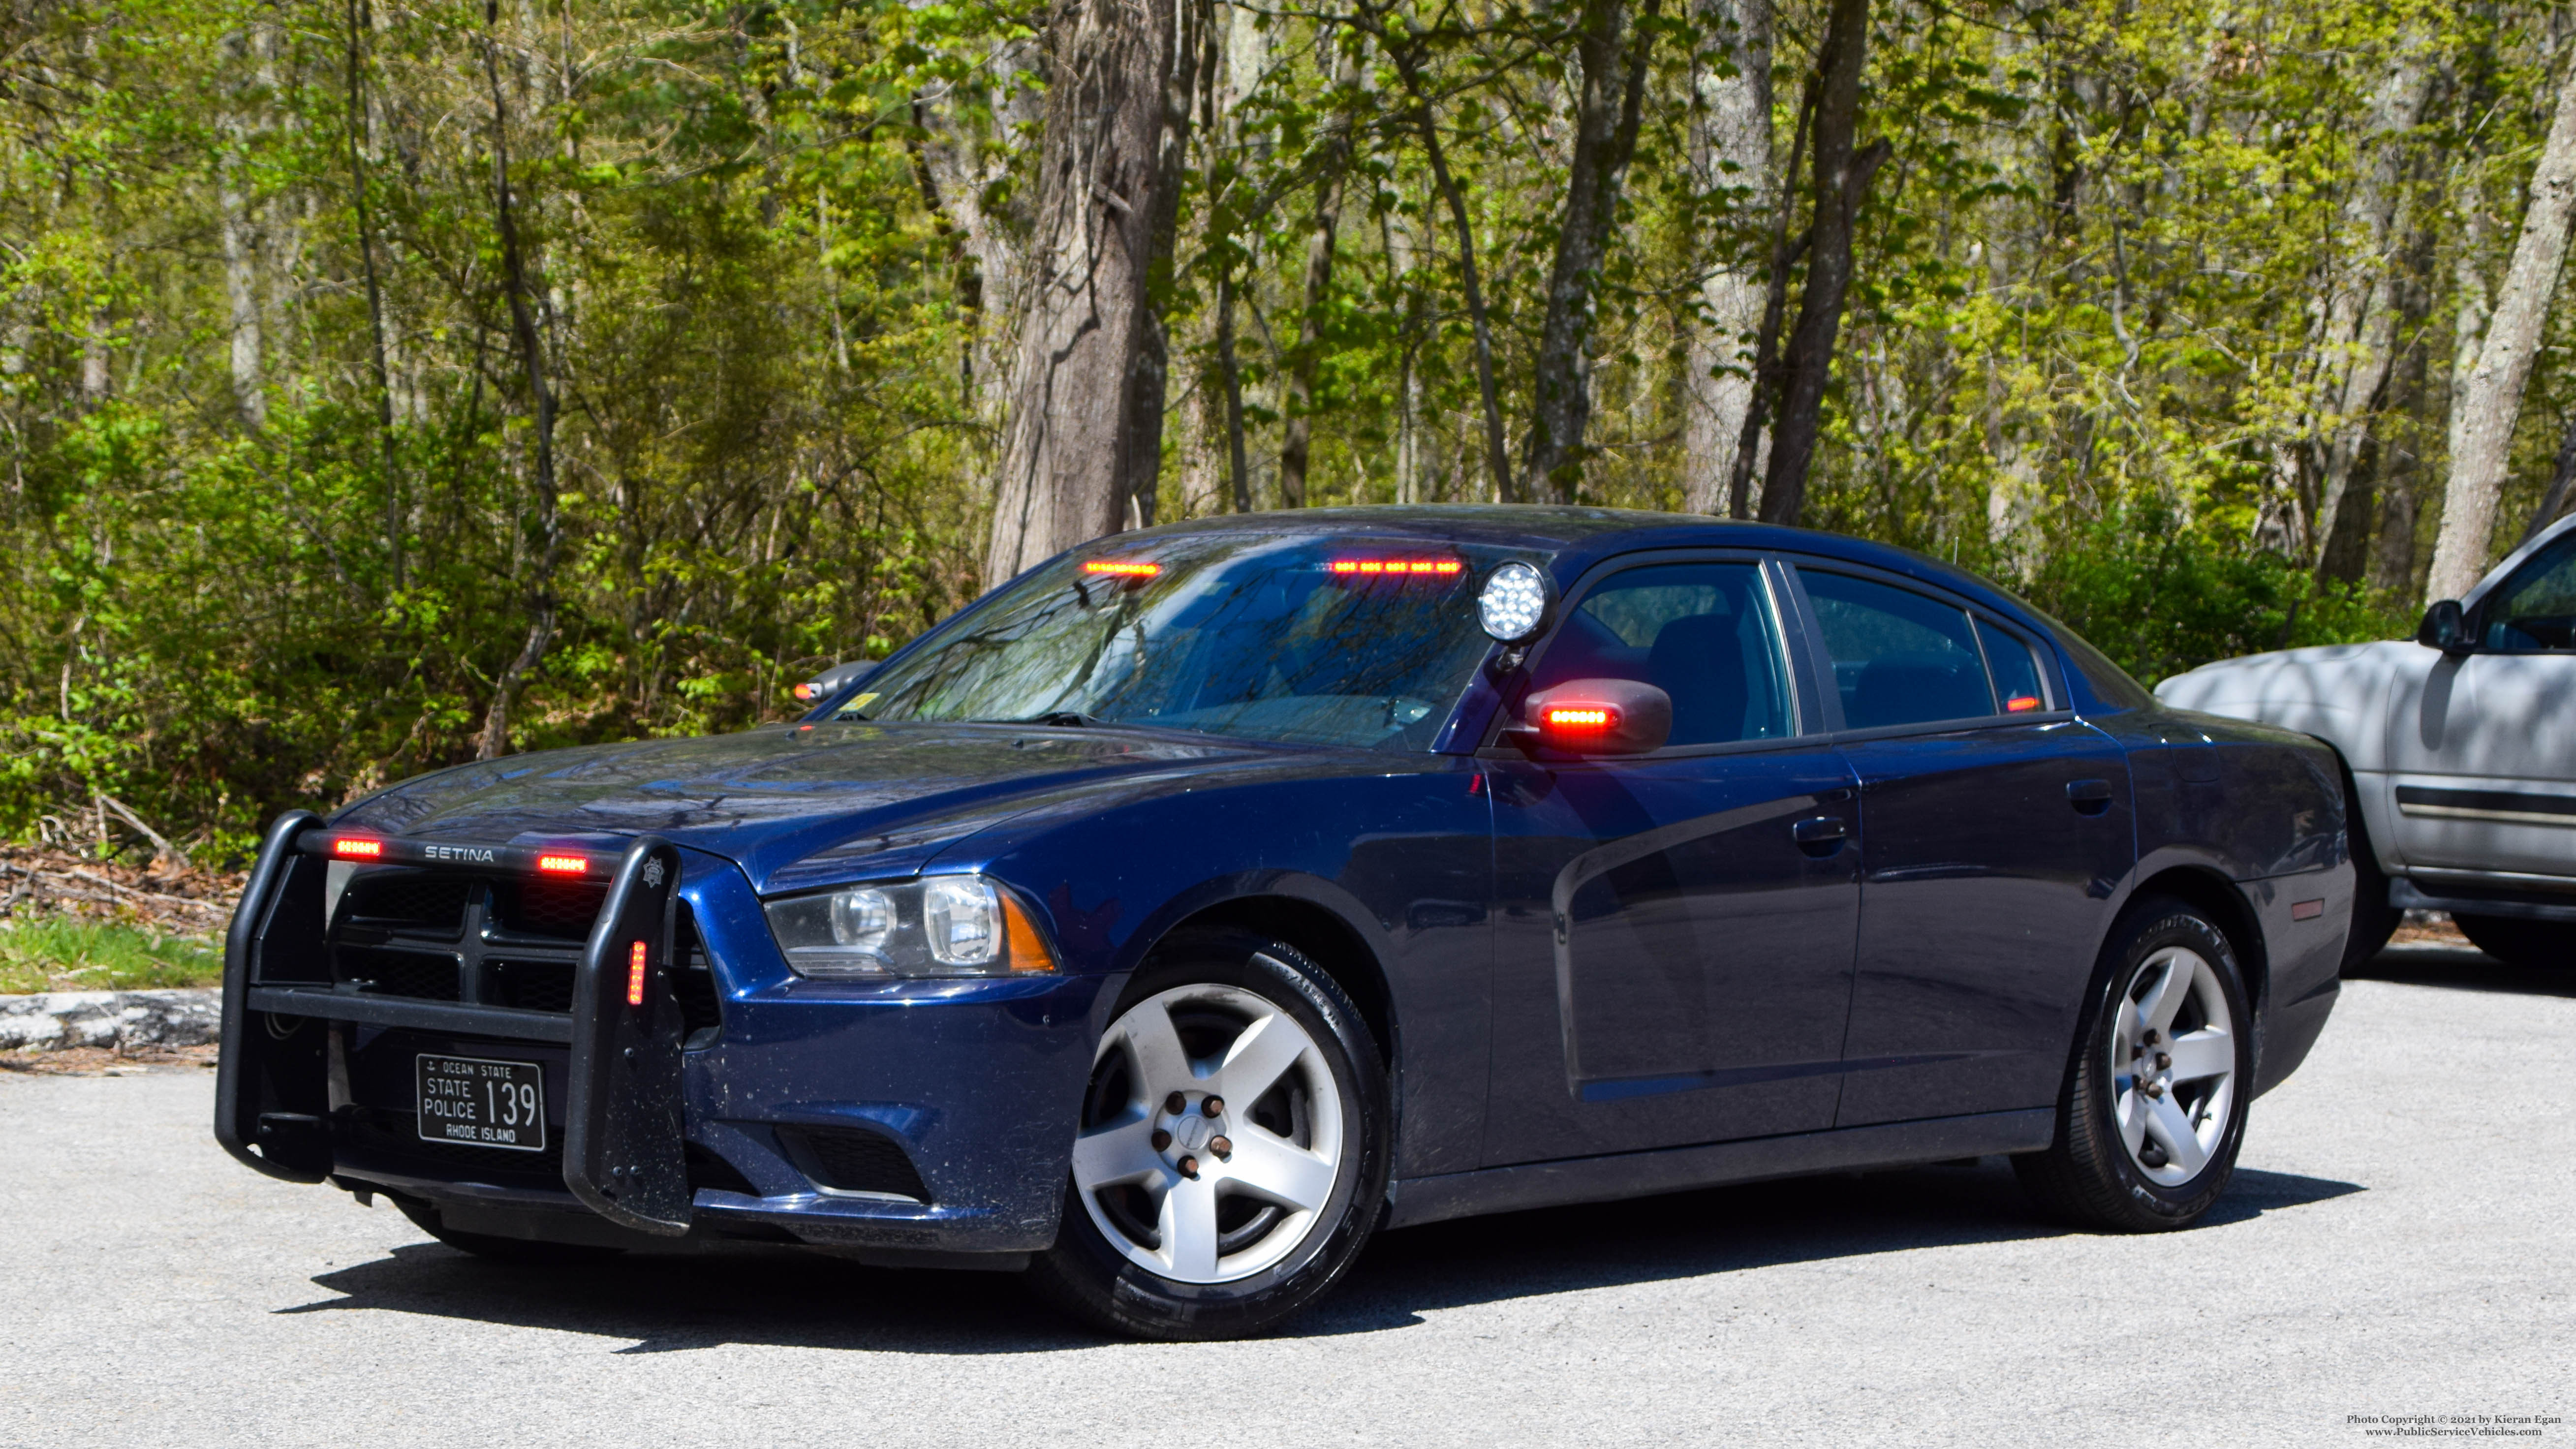 A photo  of Rhode Island State Police
            Cruiser 139, a 2013 Dodge Charger             taken by Kieran Egan